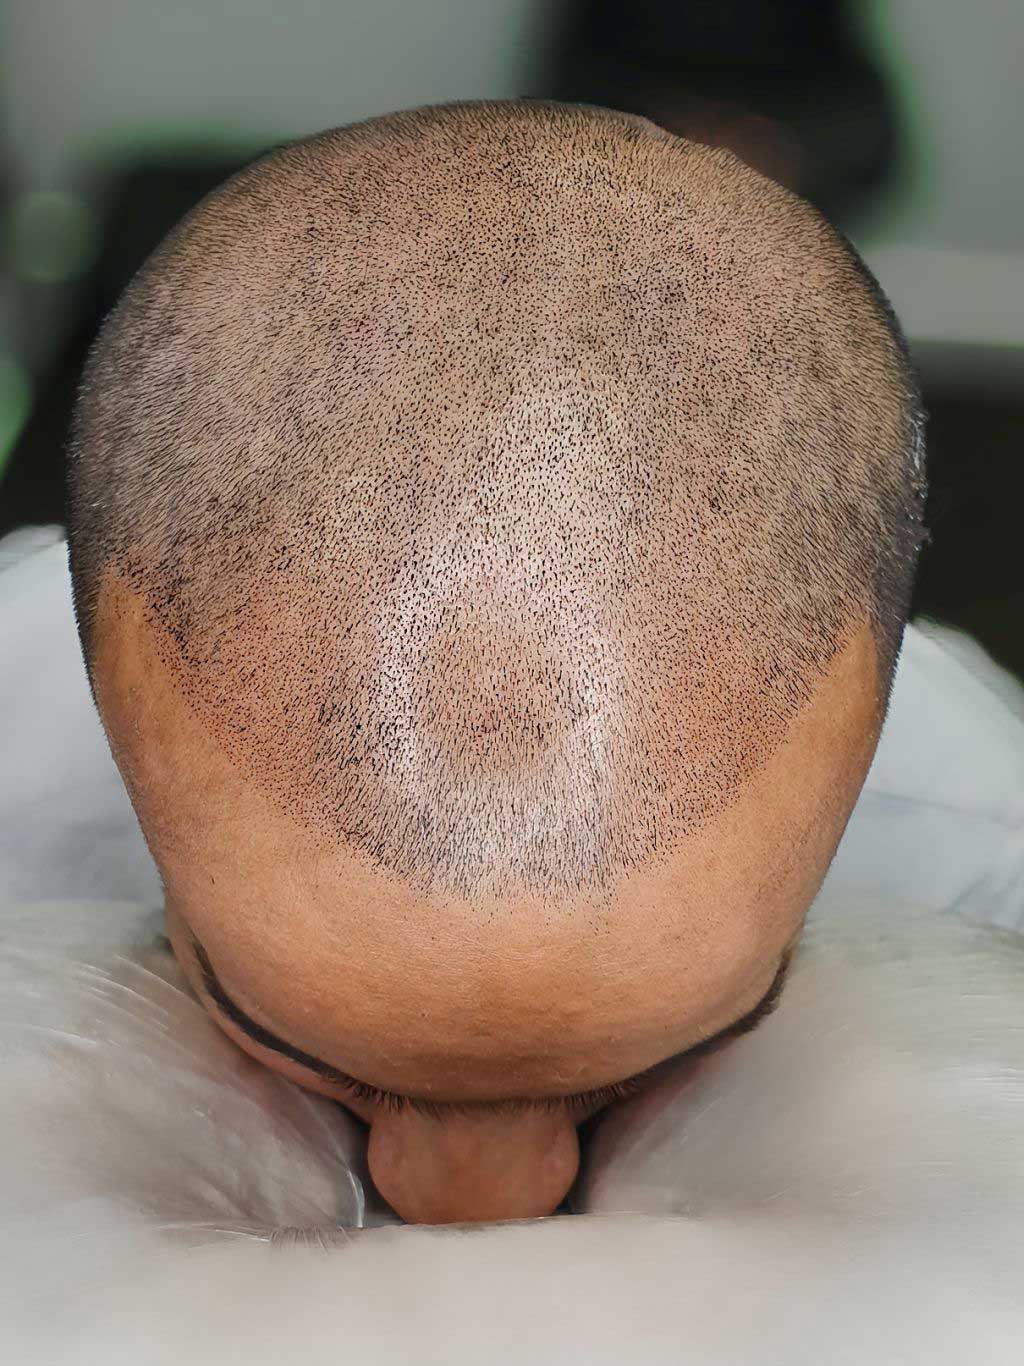 Scalp MicroPigmentation (SMP). Cosmetic and Mediical Tattoo by Dasha. Permanent makeup and reconstructive tattoo, scalp micro-pigmentation in Christchurch, New Zealand